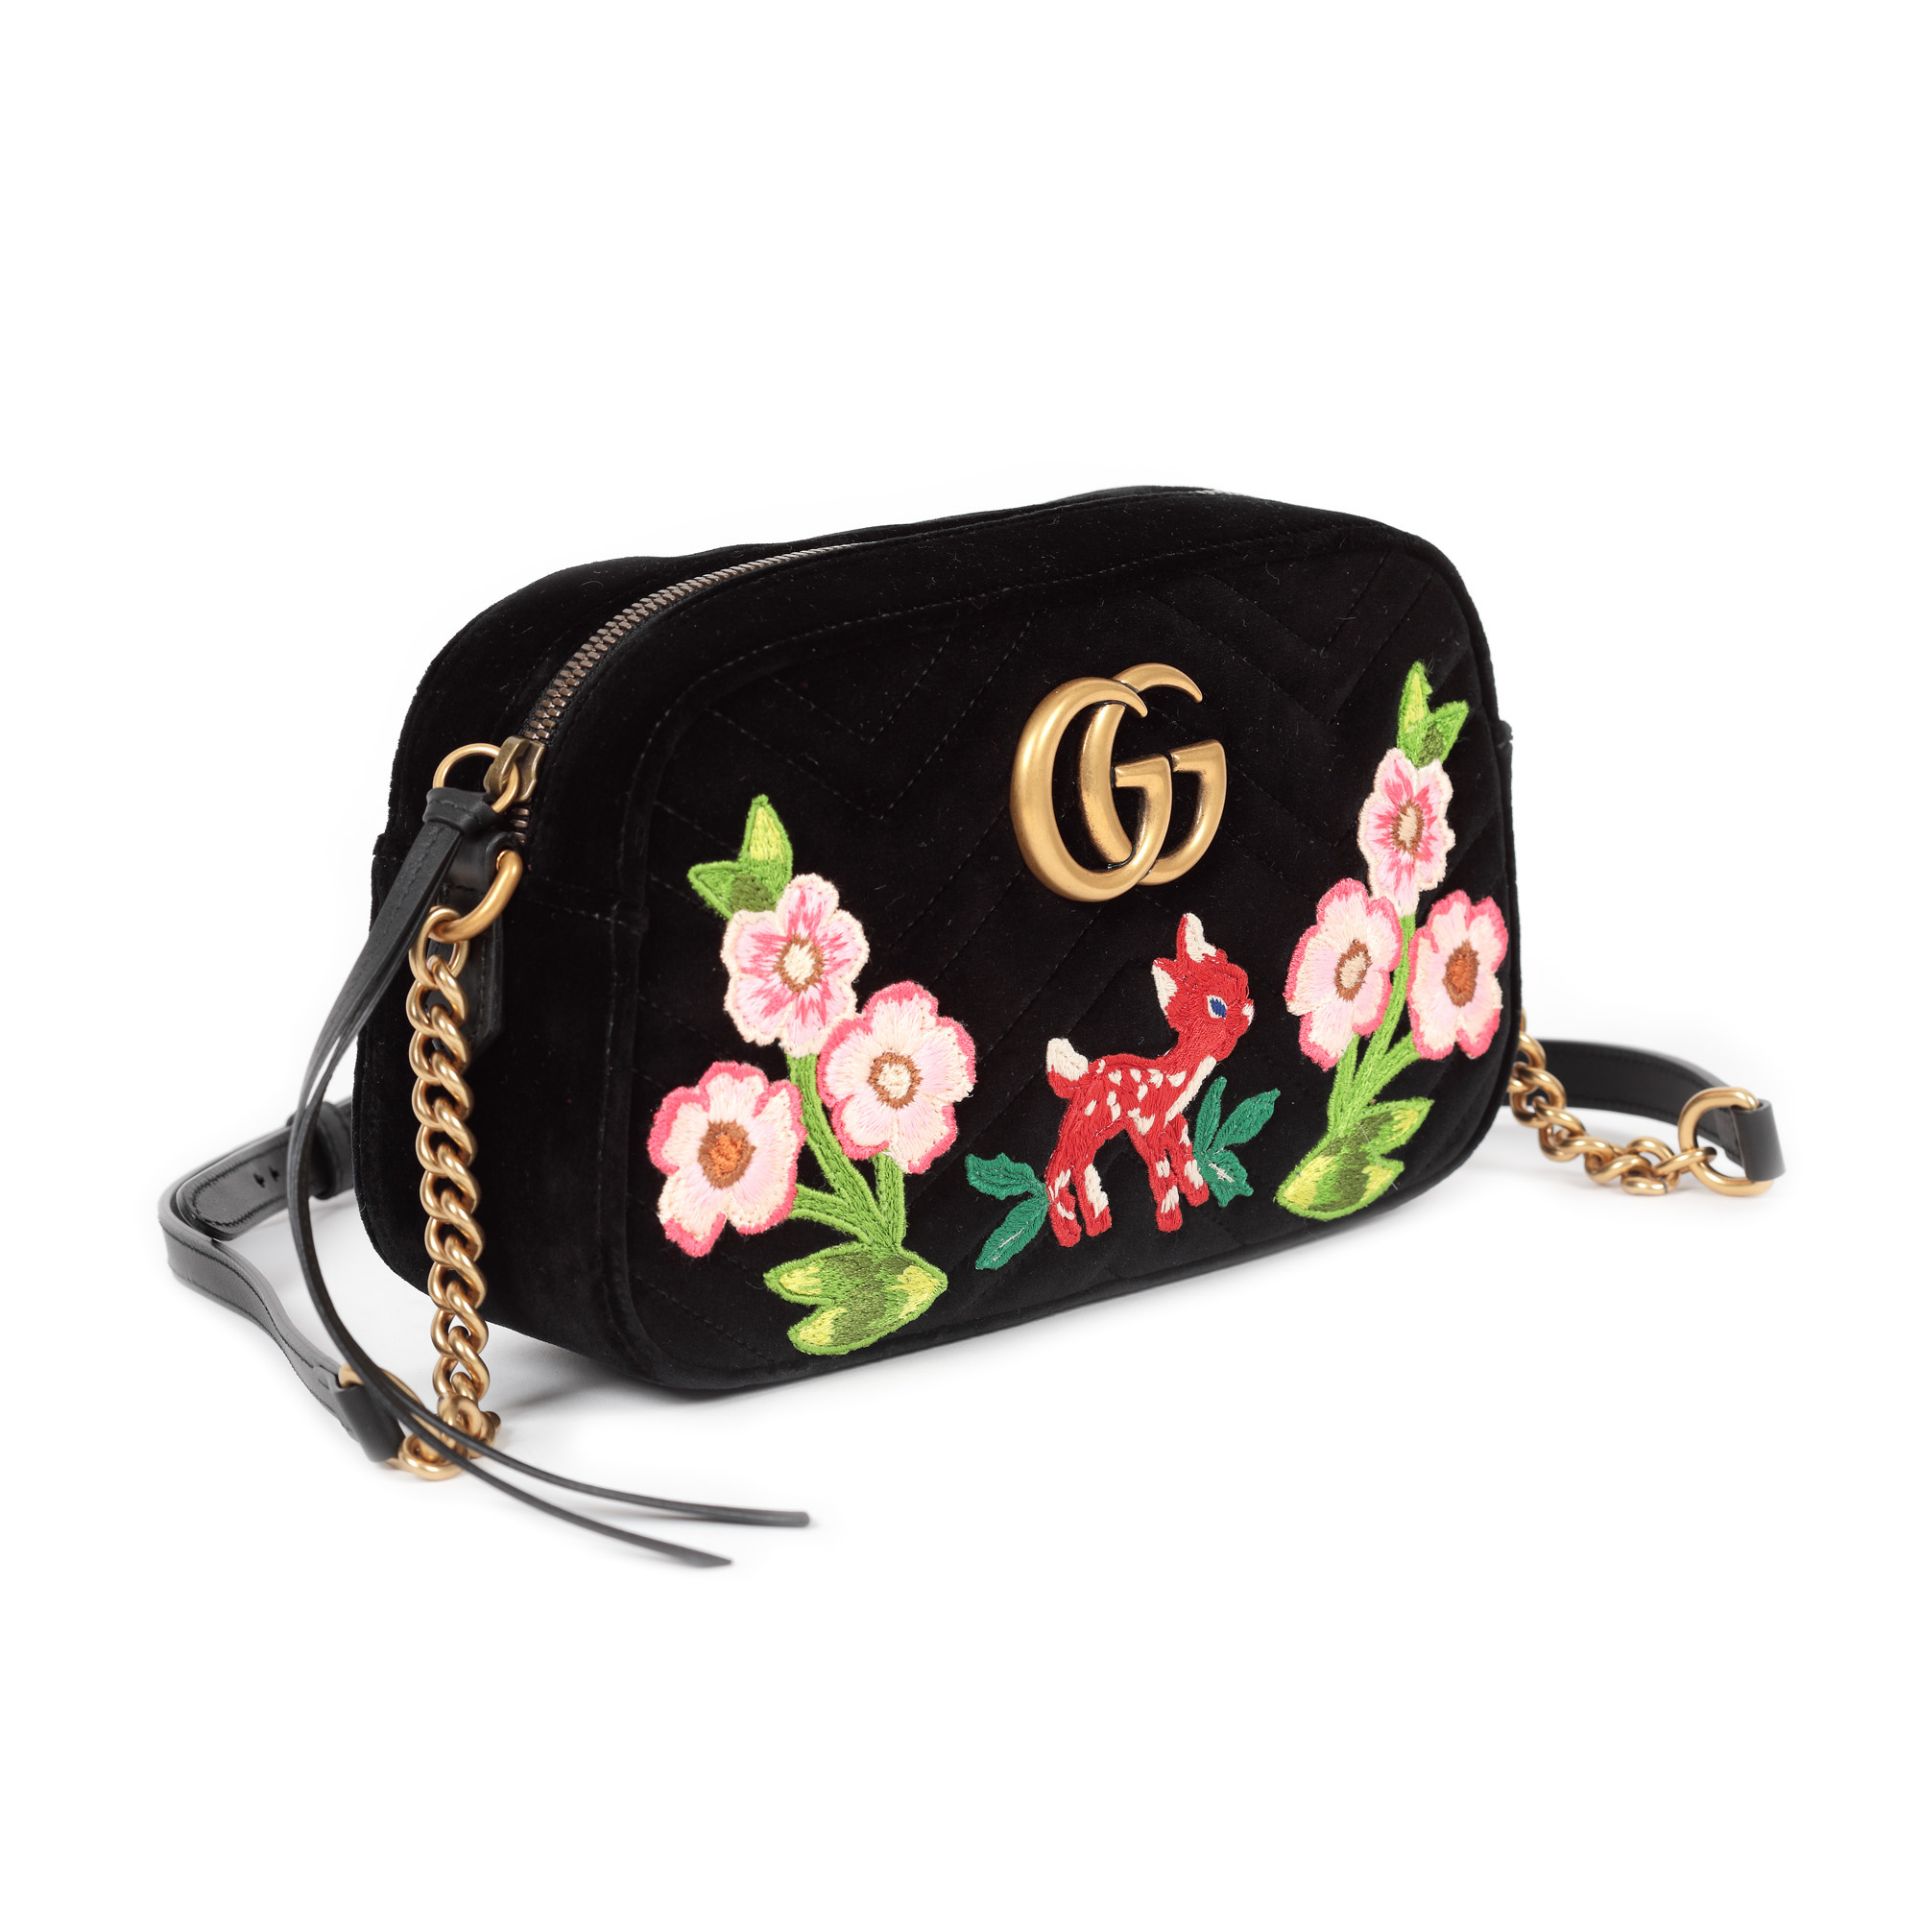 "Marmont Bambi" - Gucci bag, quilted velvet, black, embroidered elements - Image 2 of 4